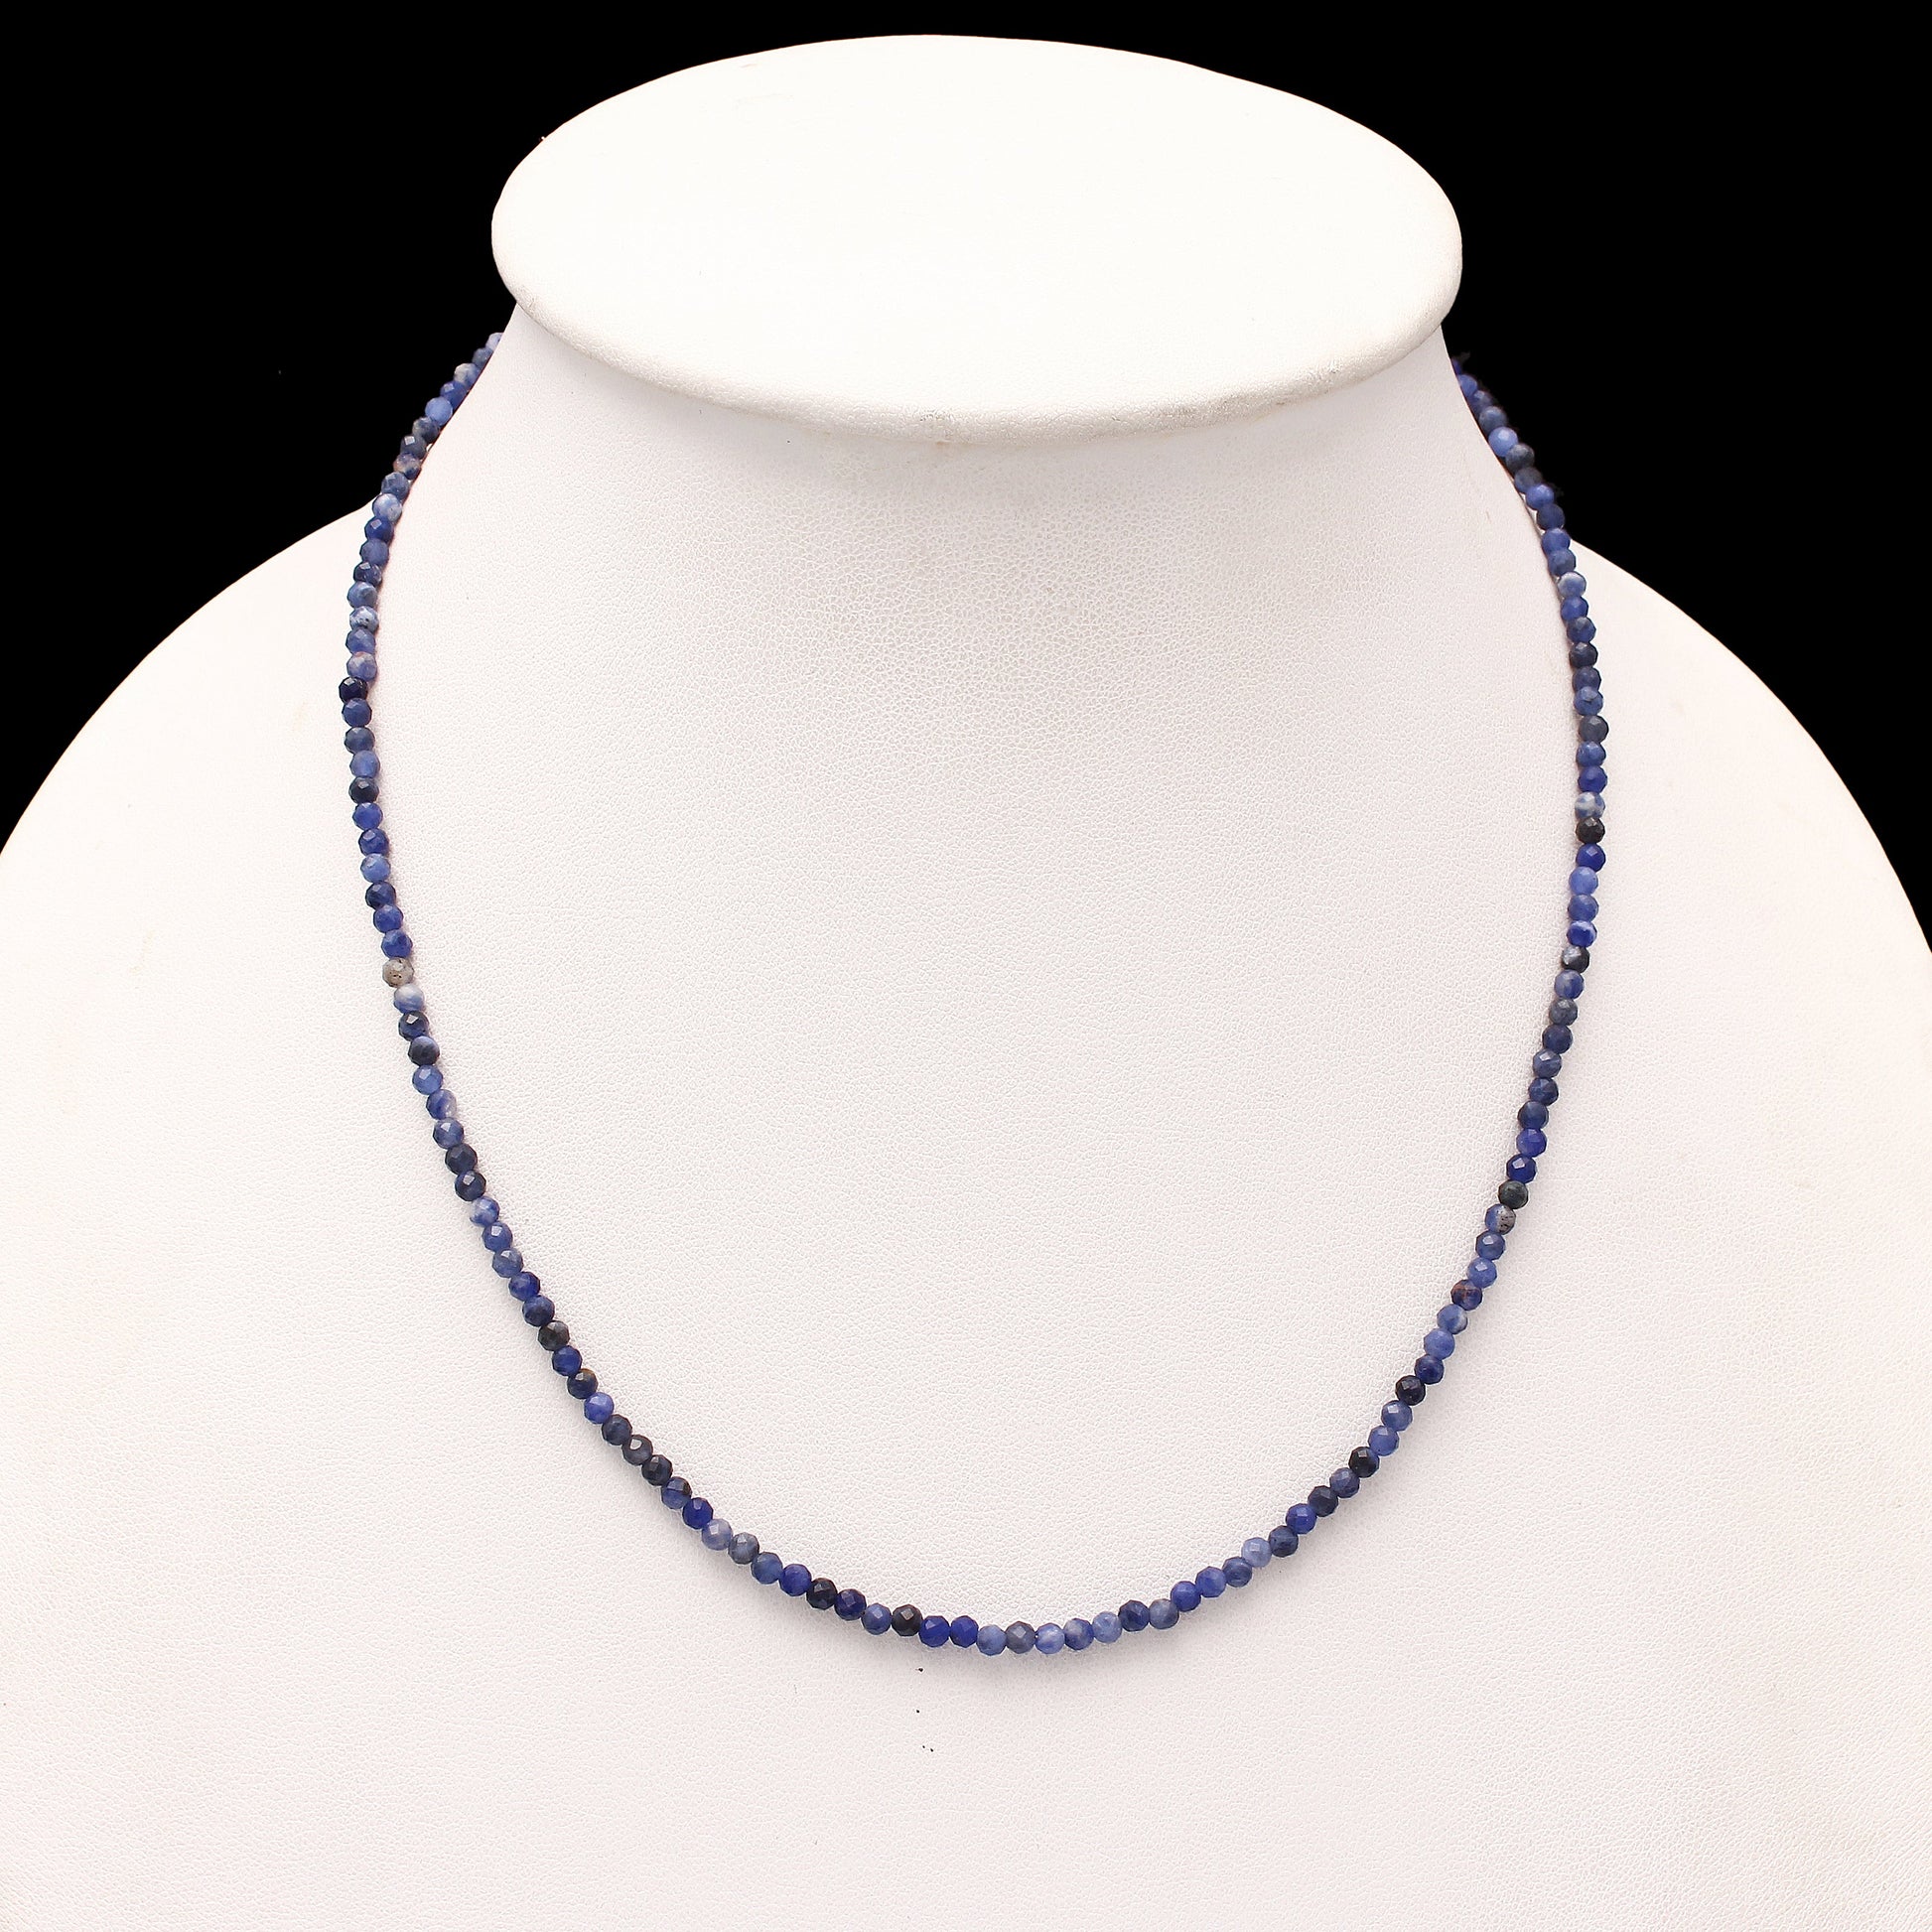 Natural Sodalite Faceted Round Beads Necklace, Sodalite Jewelry, Blue Minimalist Layering Silver Necklace GemsRush